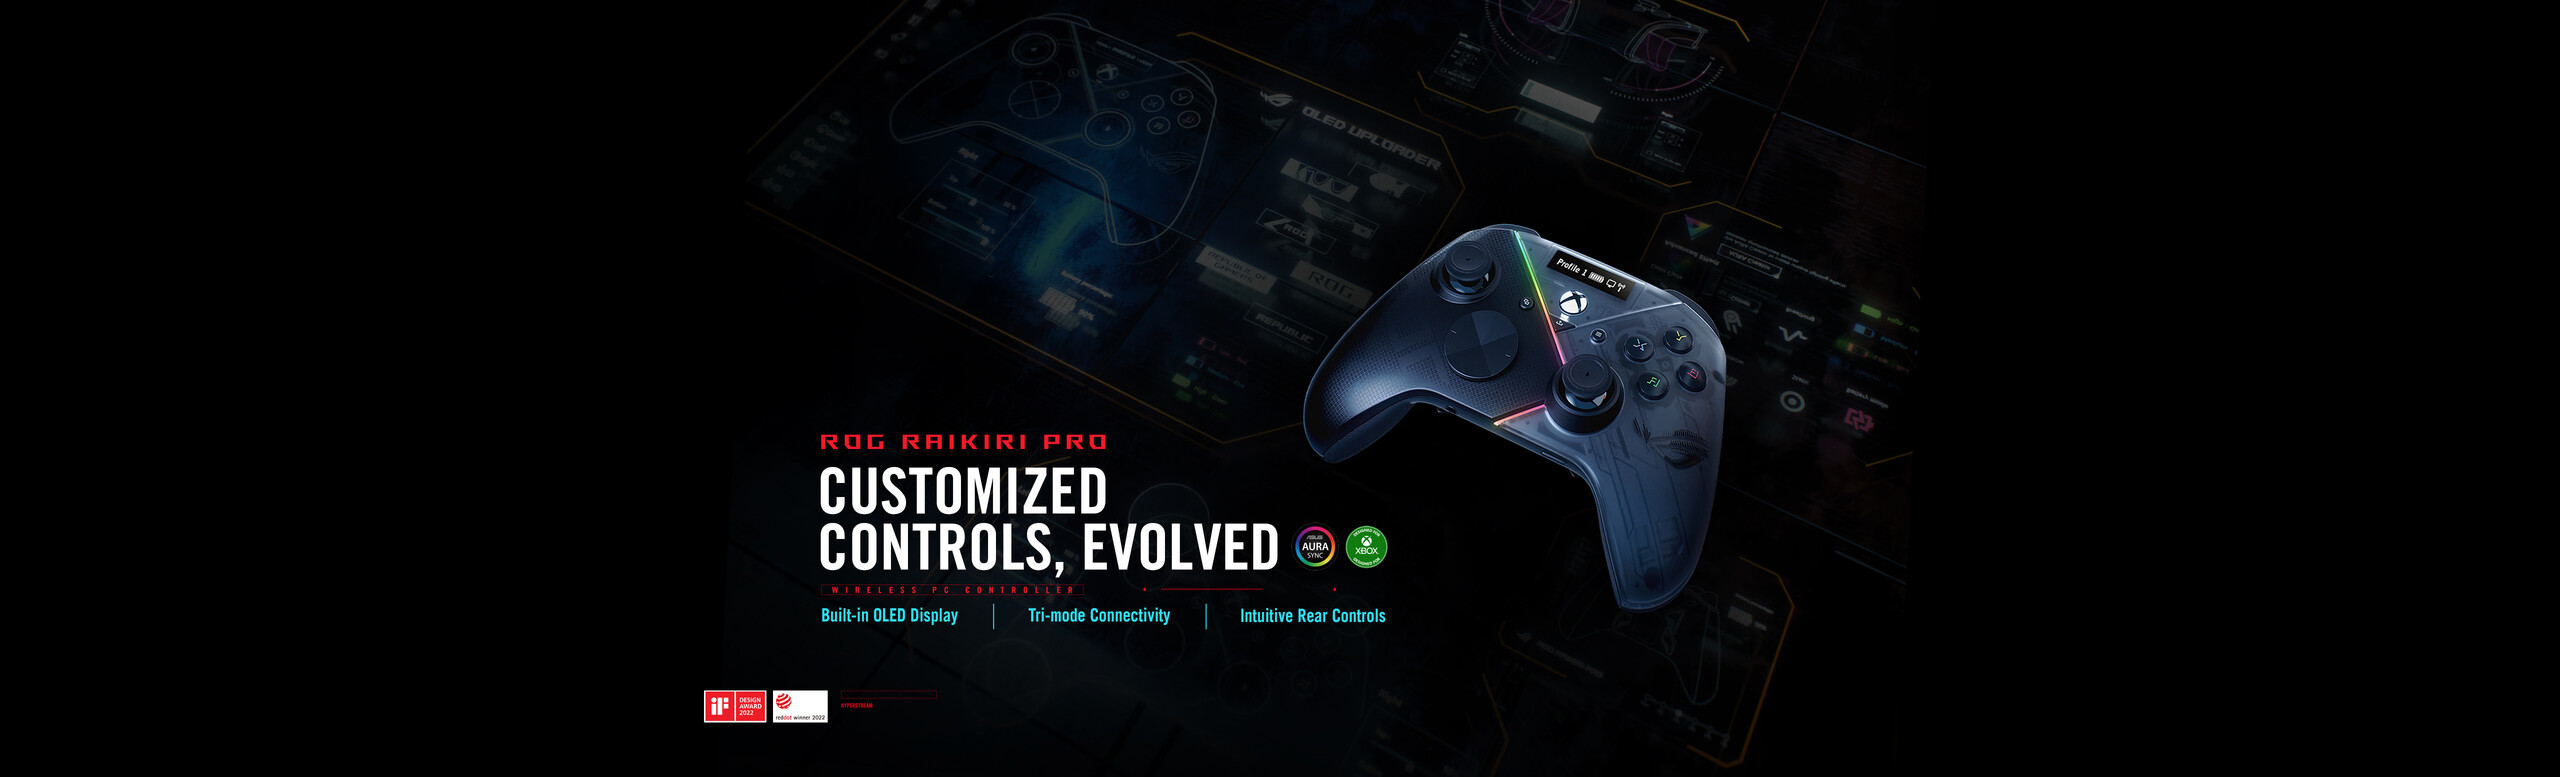 ROG Raikiri - customized controls, evolved - built in oled display and tri-mode connectivity